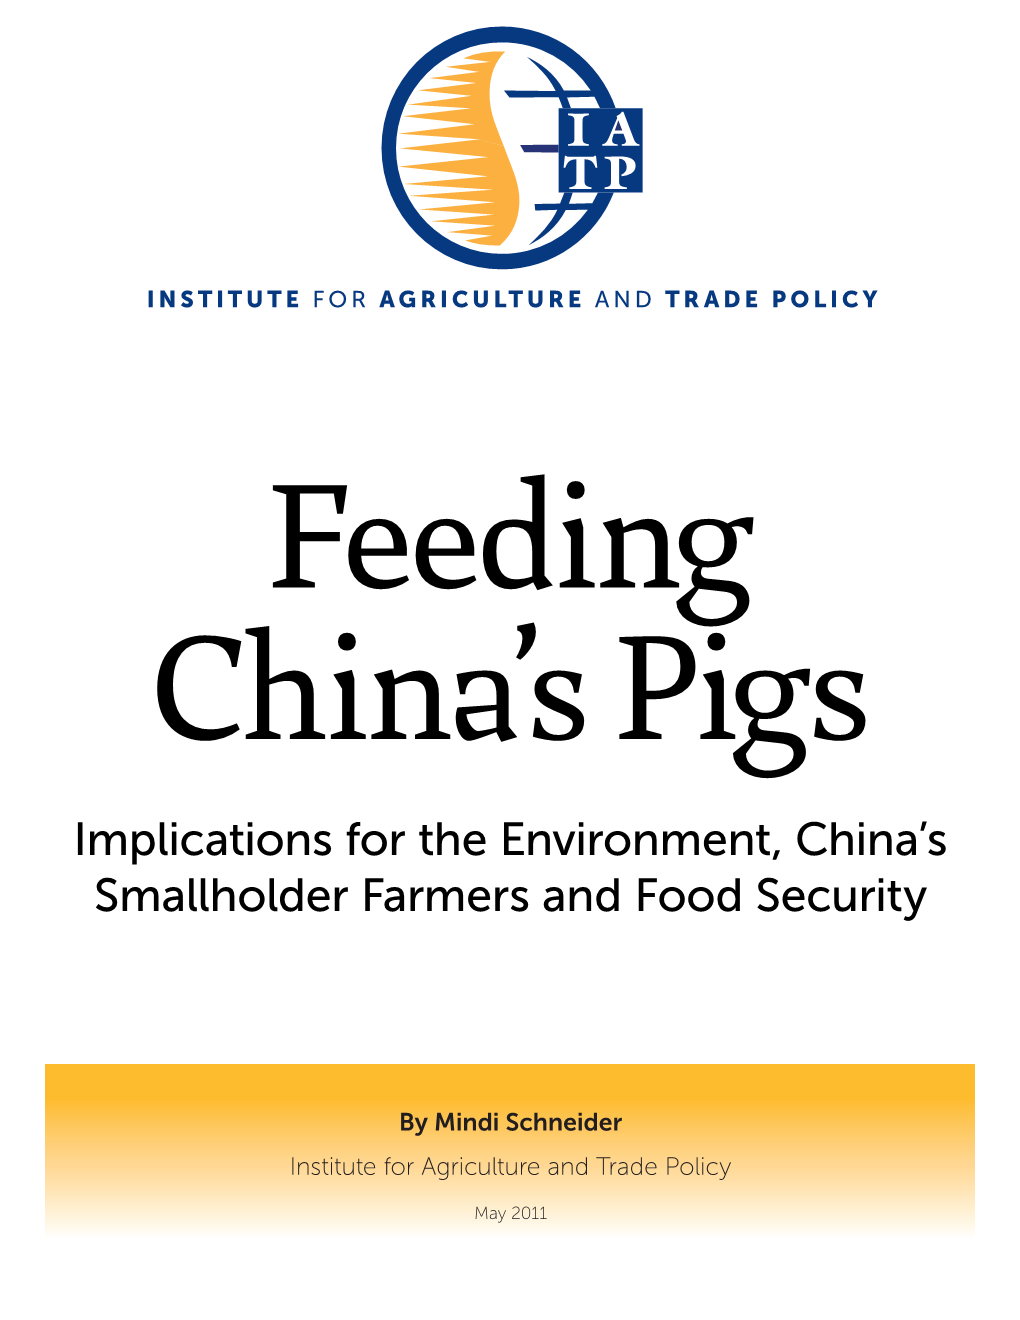 Implications for the Environment, China's Smallholder Farmers And